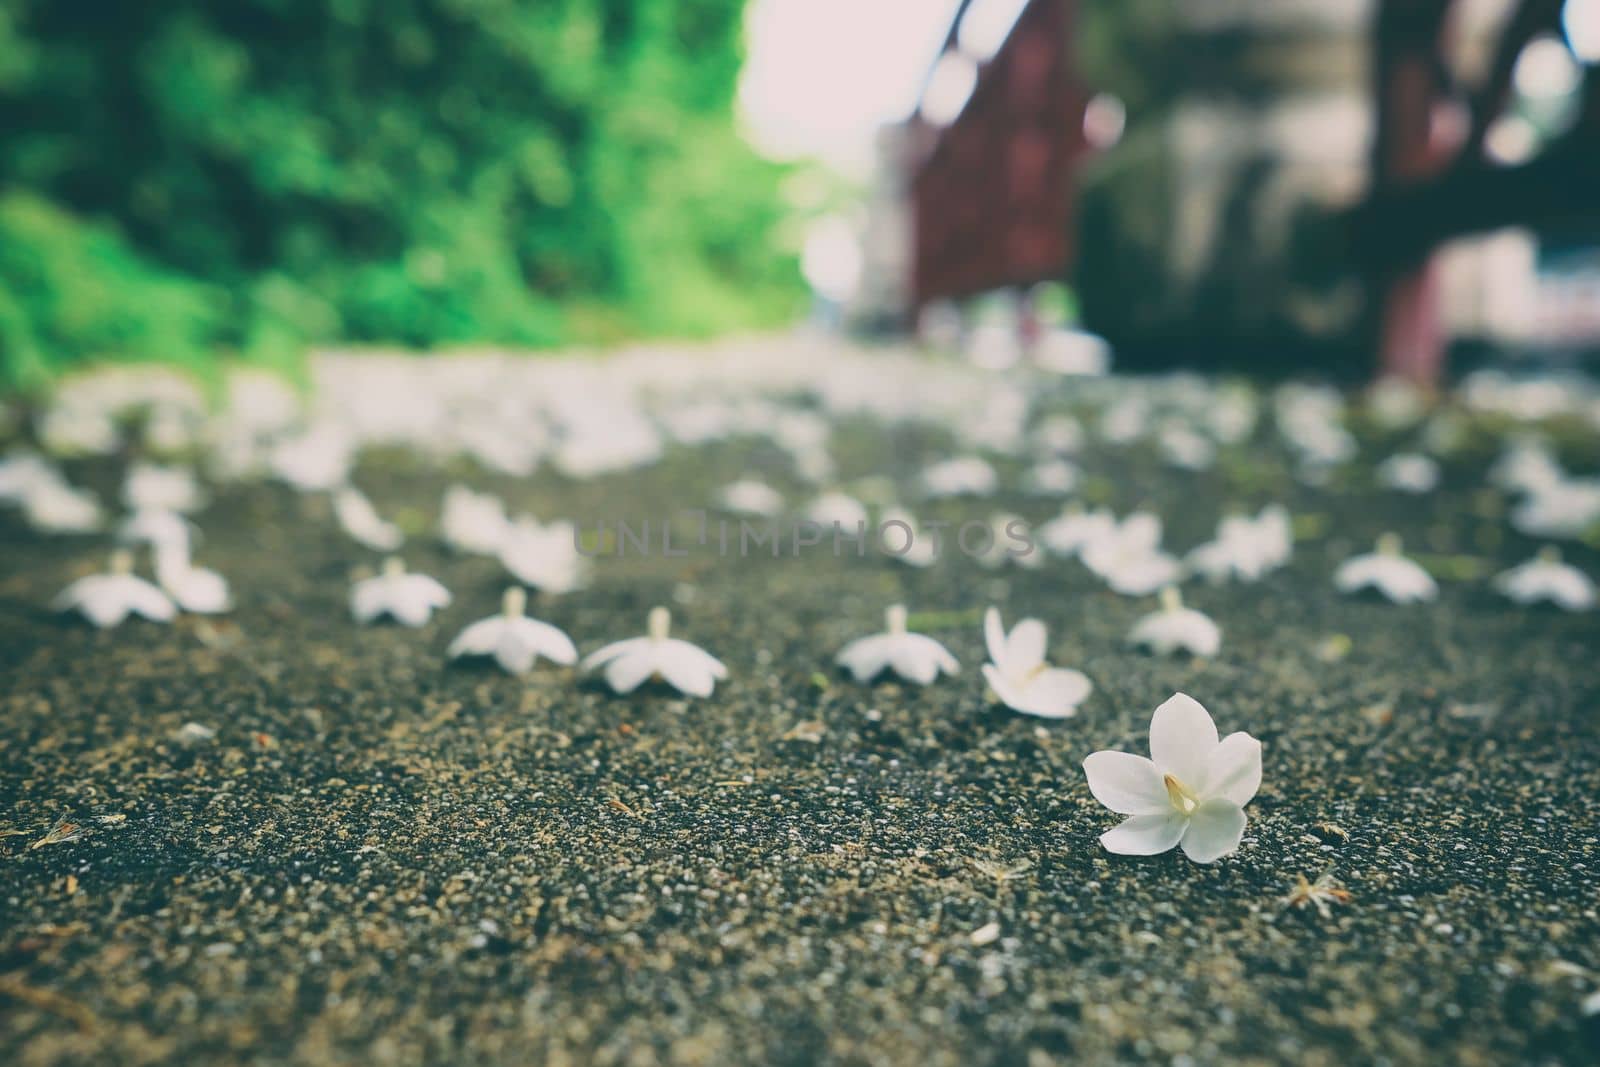 Closed-up White Wild Water Plum Flowers on Ground in Vintage Style. (Selective Focus)